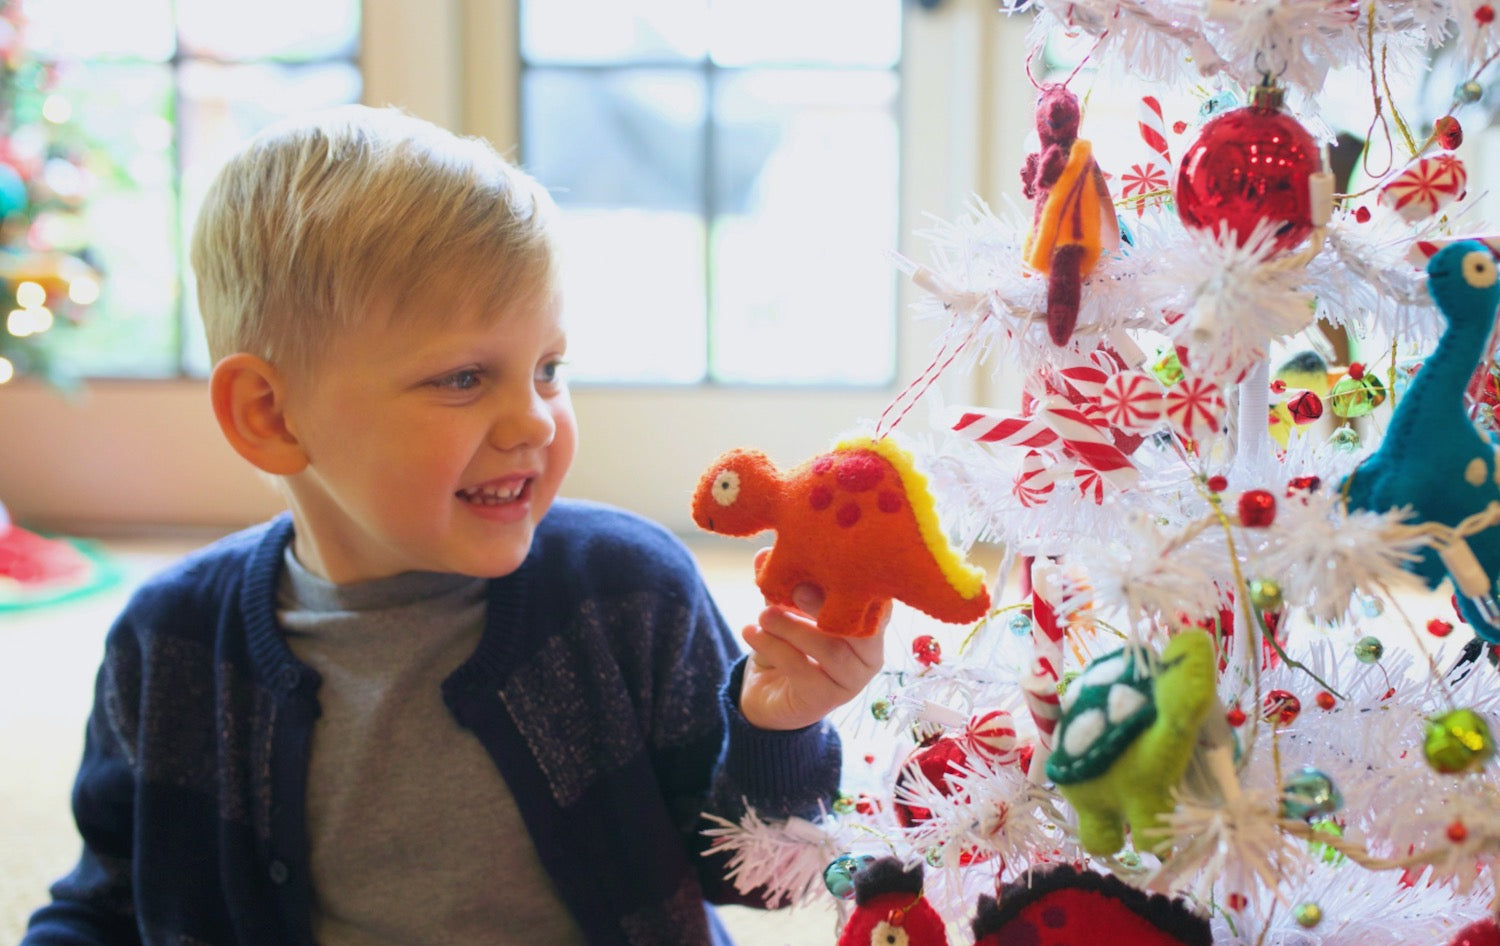 Little Boy Looking at Dinosaur Christmas Ornaments by Ornaments 4 Orphans